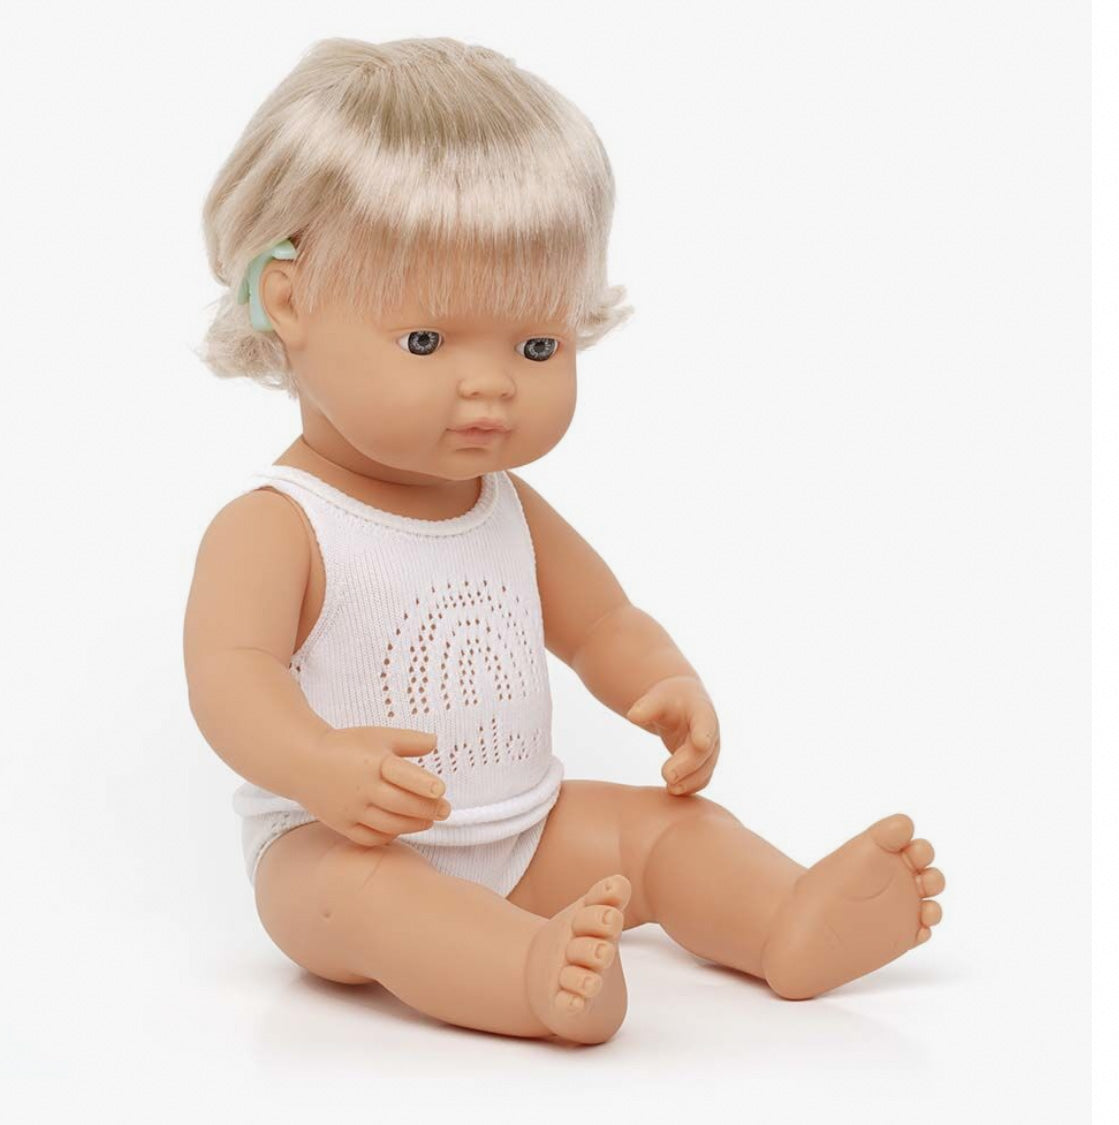 NEW miniland doll blonde european girl with hearing implant 38 cm